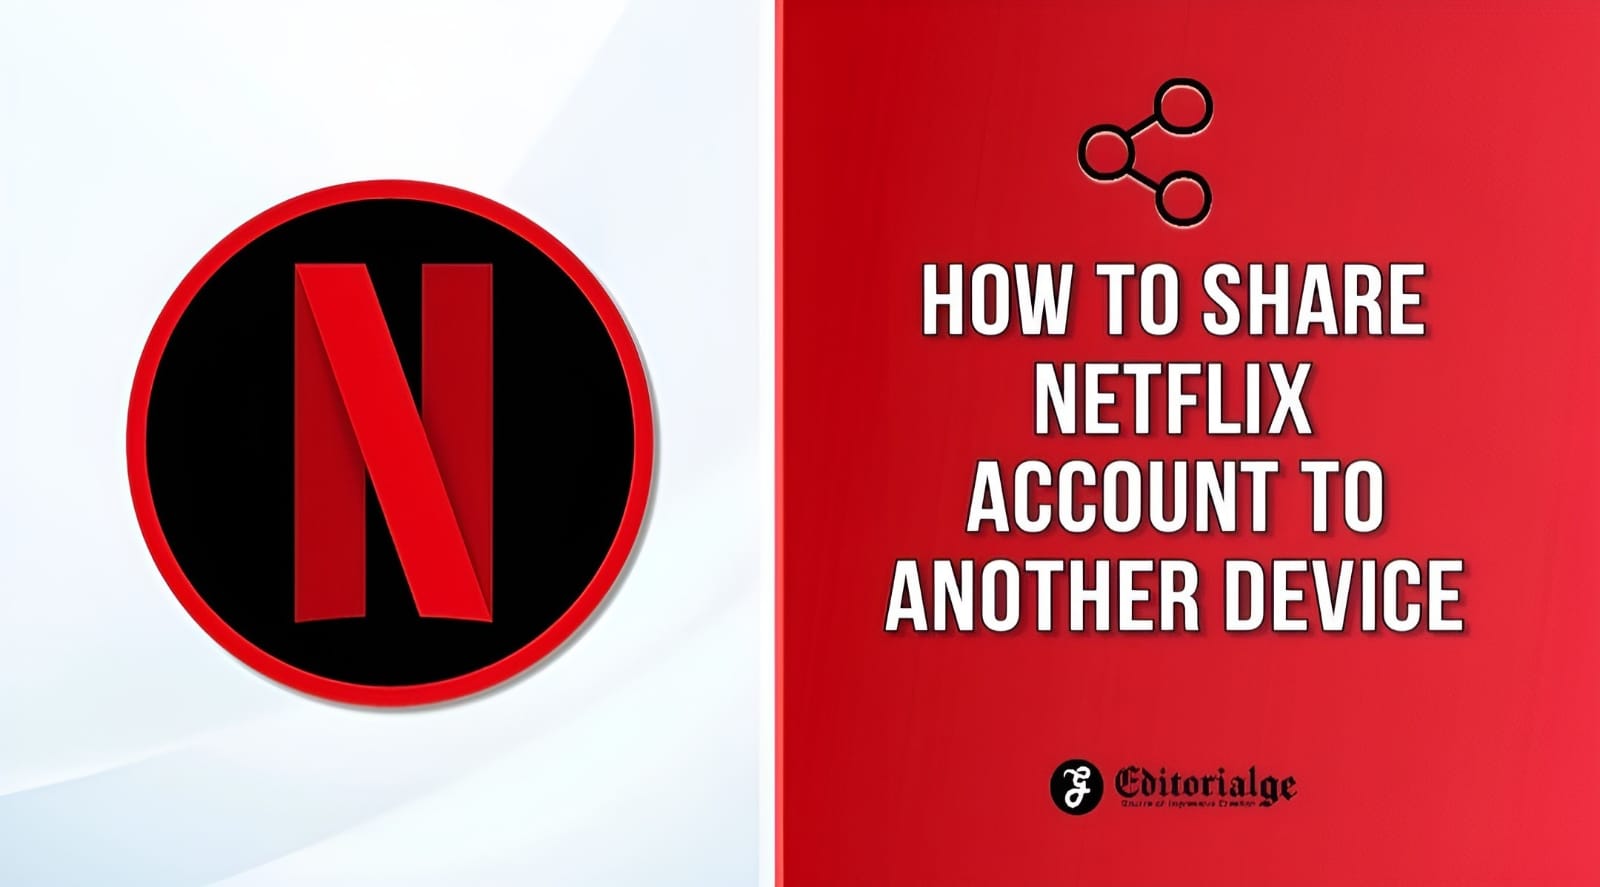 How to share netflix account to another device